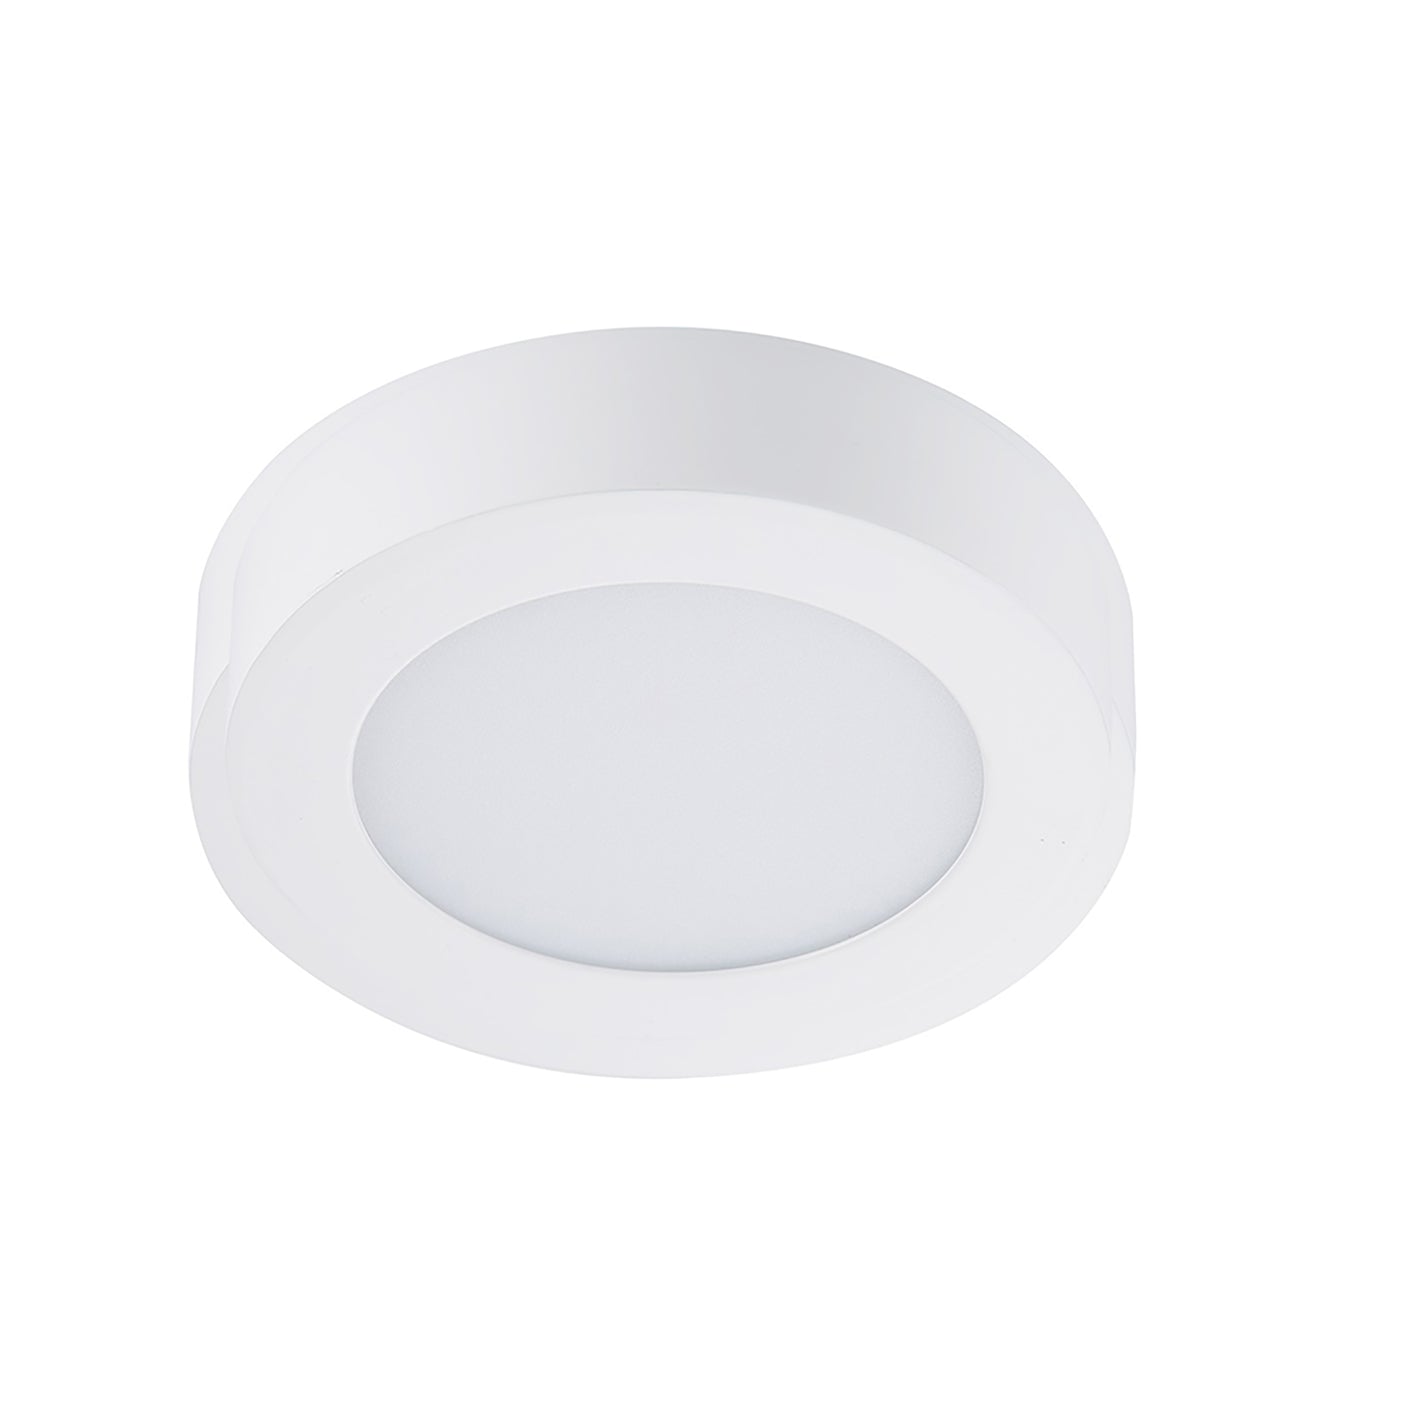 7 Inch 5CCT Color Selectable Surface Mount Panel Light Fixture, White Finish